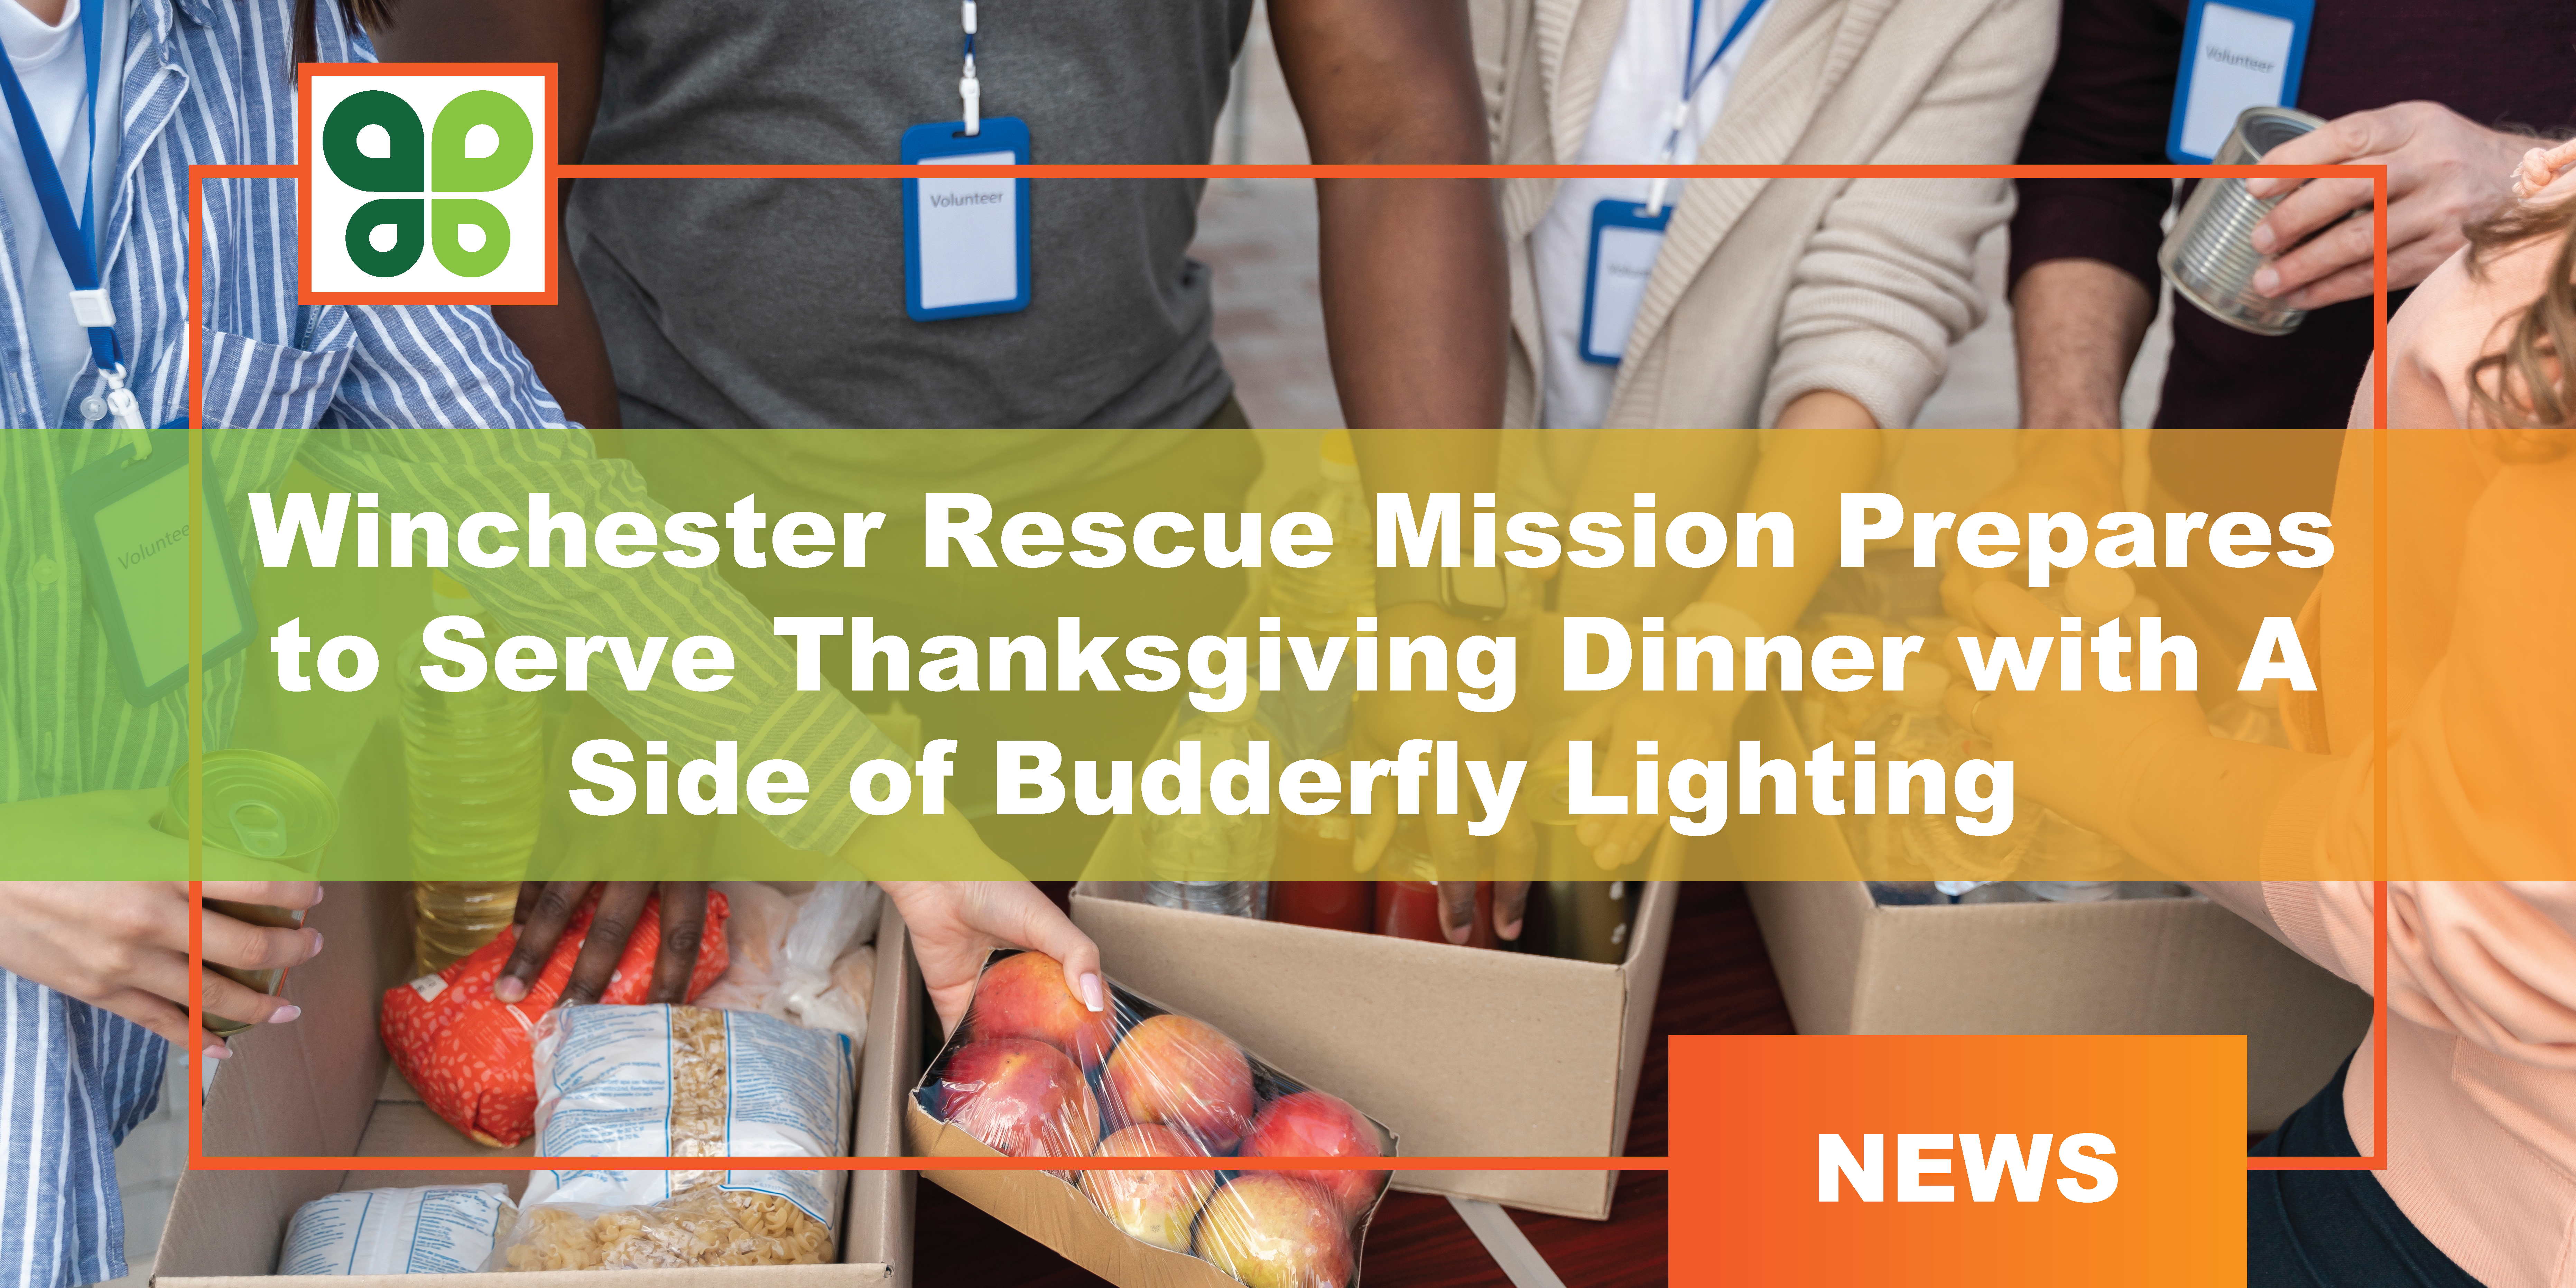 Winchester Rescue Mission prepares to serve Thanksgiving dinner with a side of Budderfly lighting